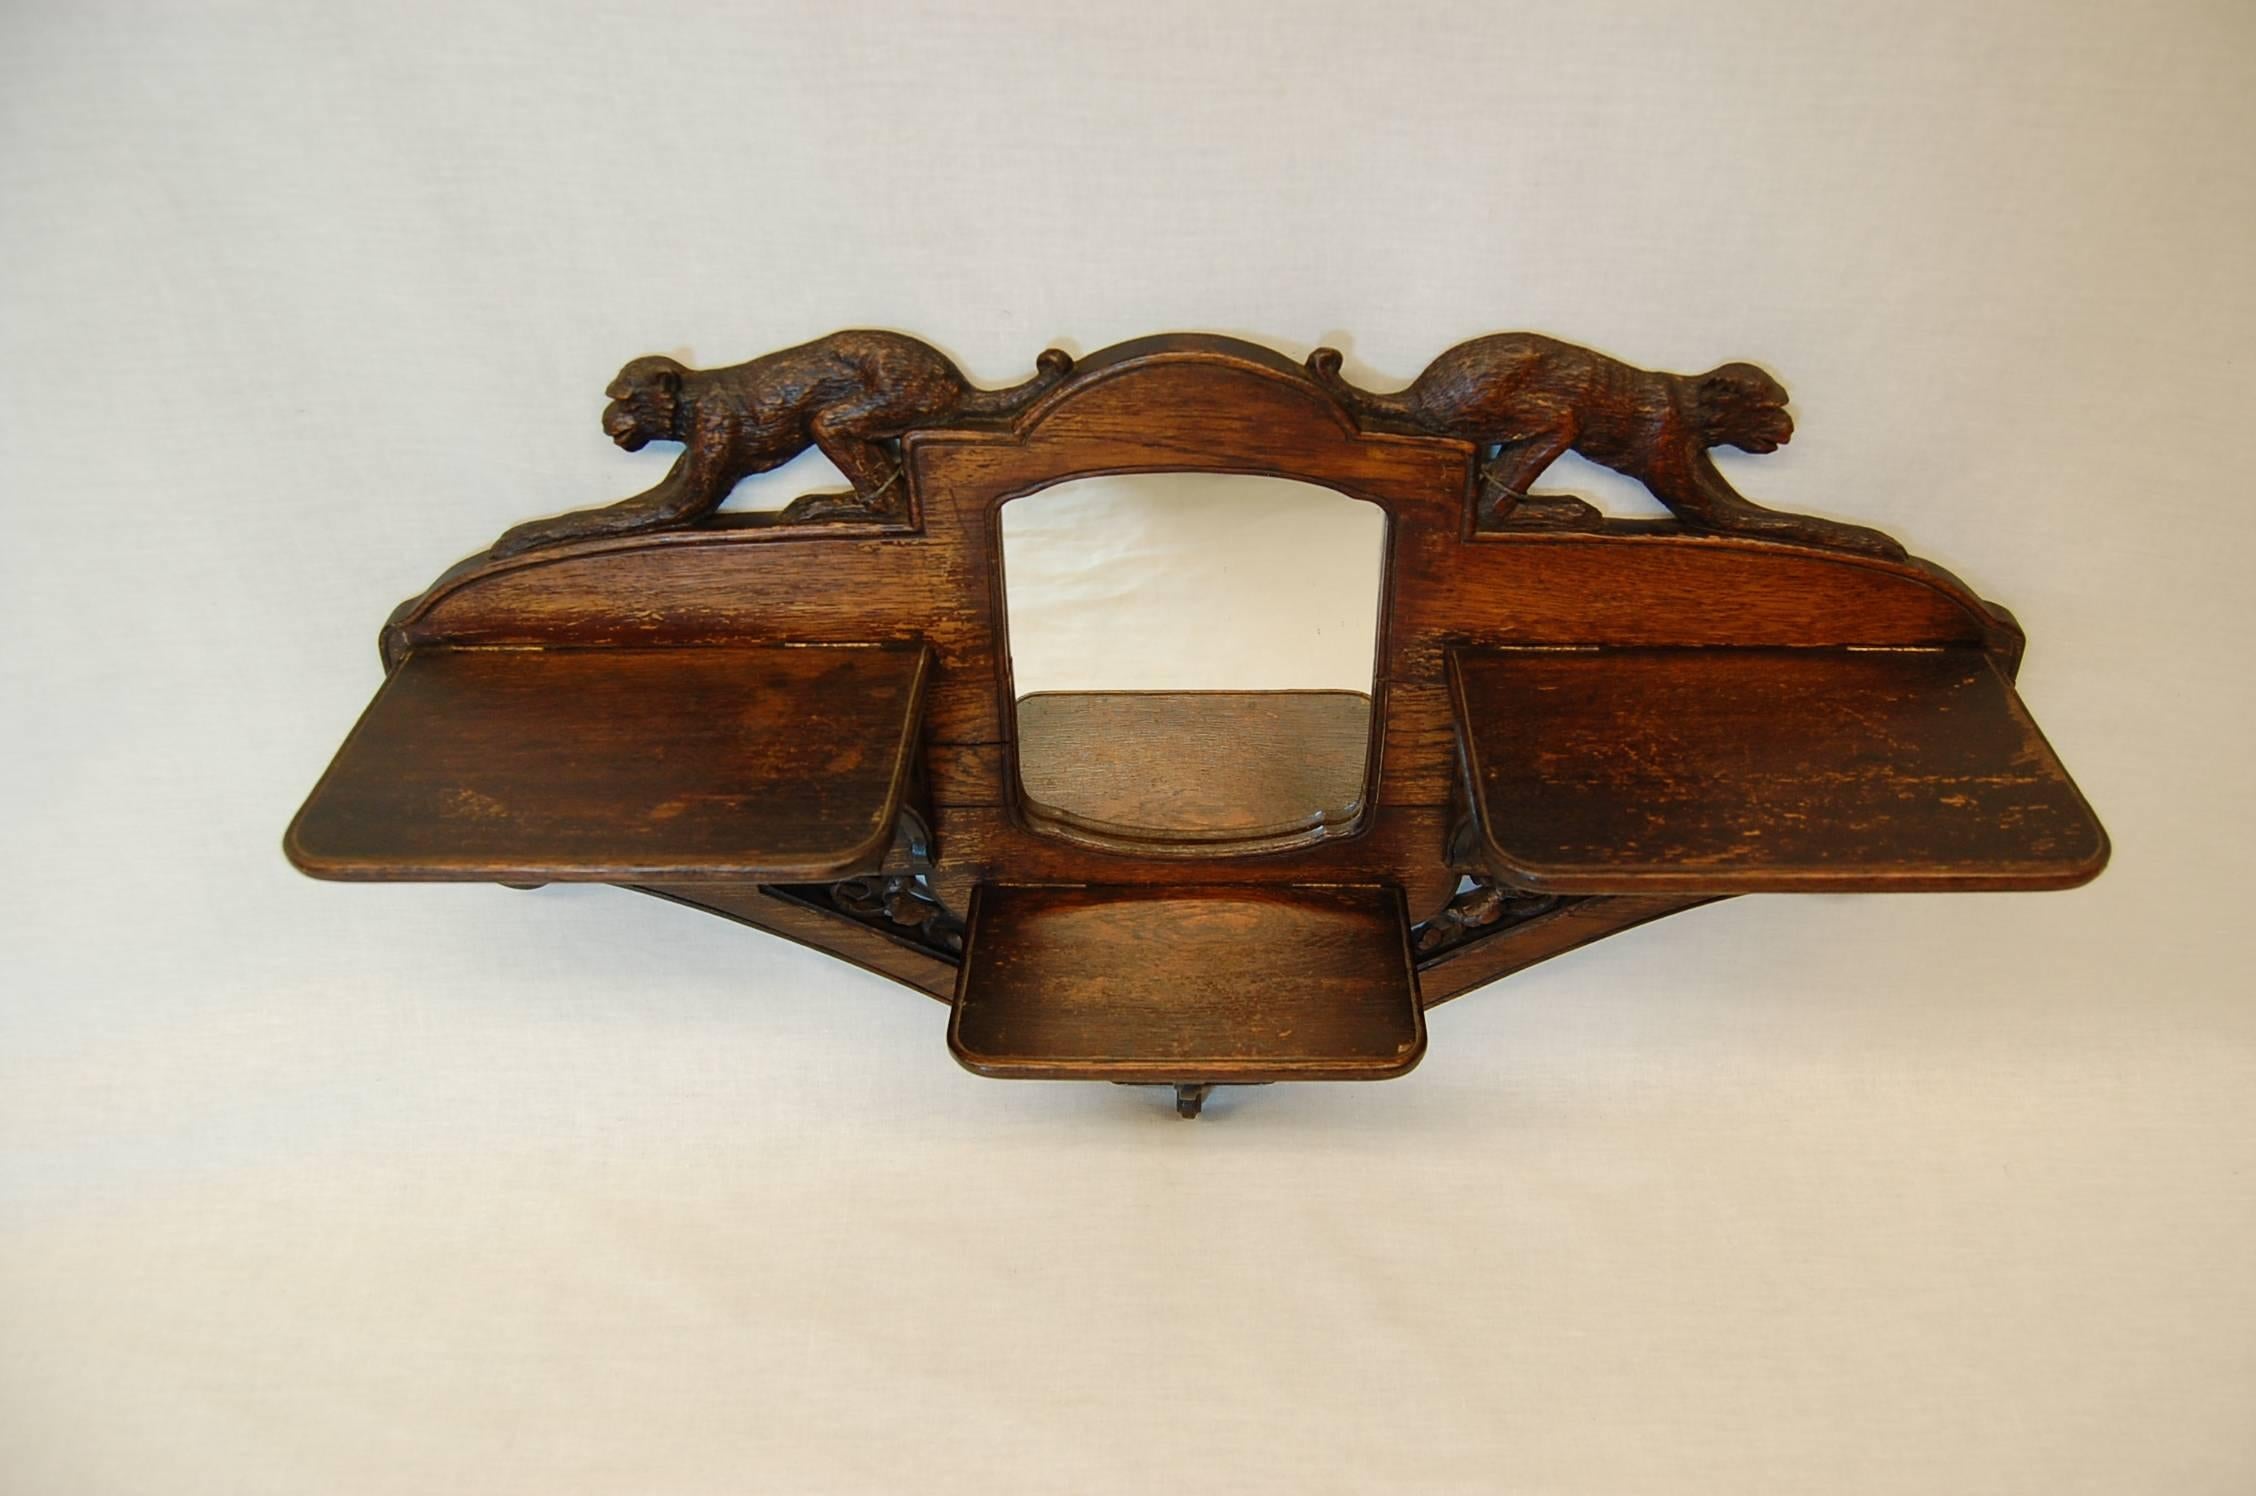 Wood Carved Oakwood Wall-Mounted Shaving Mirror with Flip-Up Shelves, circa 1890